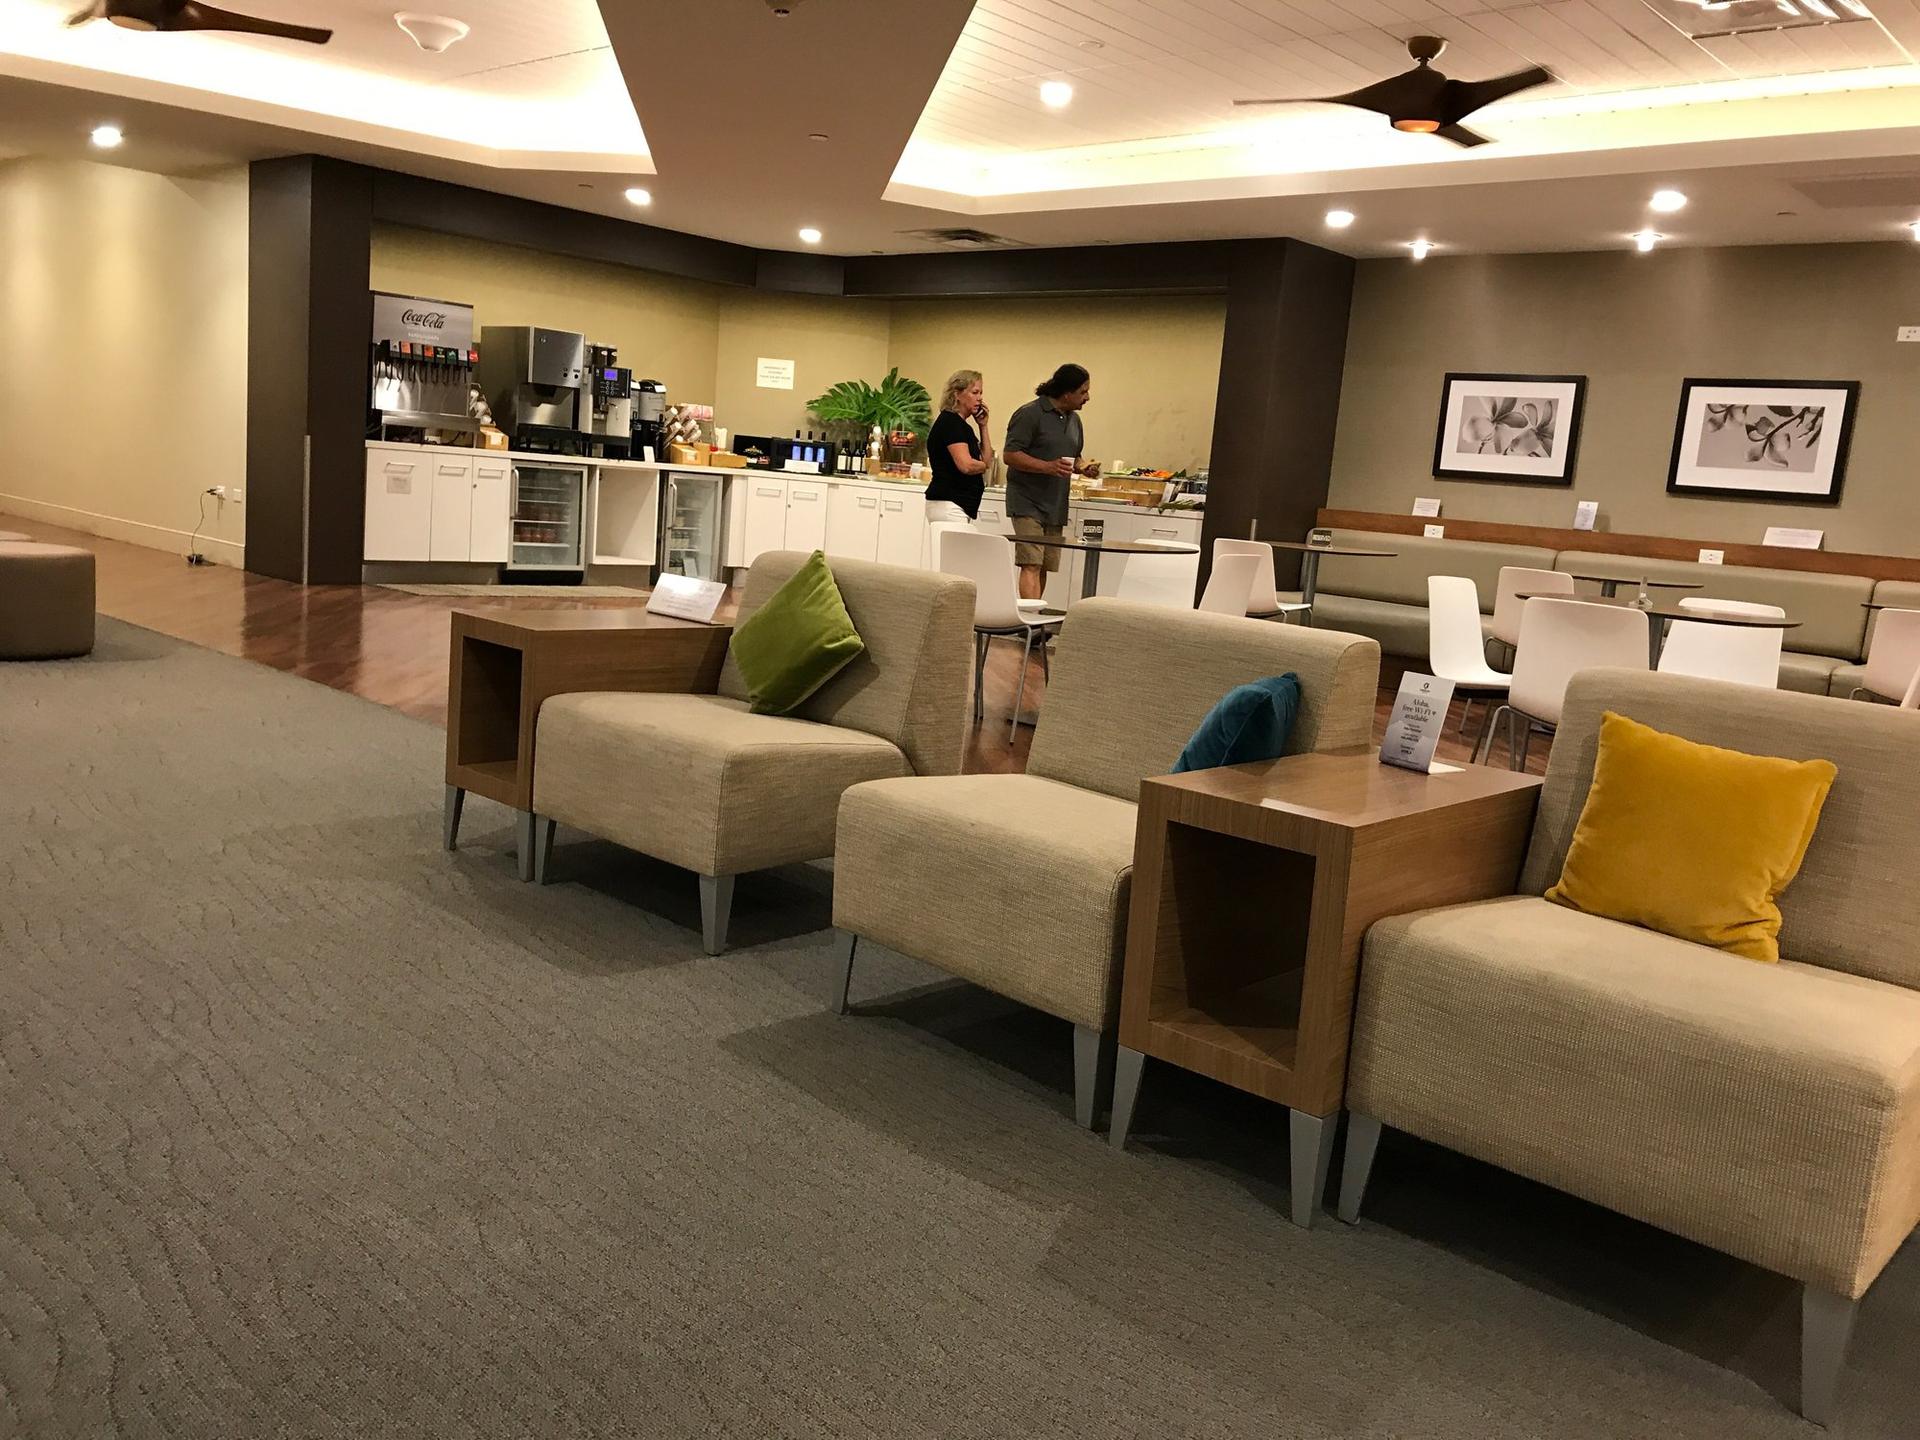 Hawaiian Airlines The Plumeria Lounge image 8 of 41